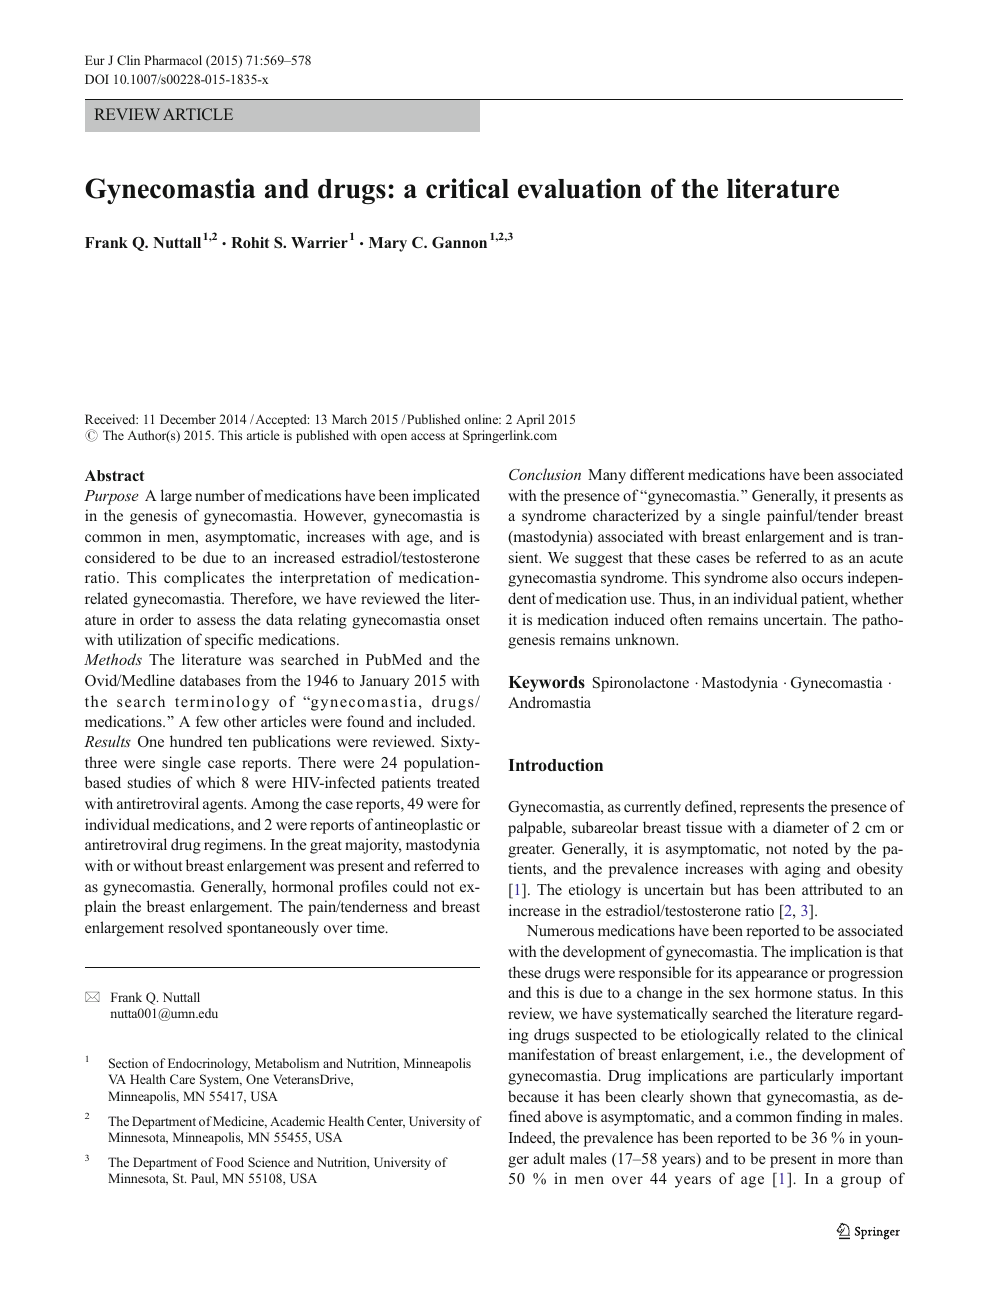 Gynecomastia And Drugs A Critical Evaluation Of The Literature Topic Of Research Paper In Clinical Medicine Download Scholarly Article Pdf And Read For Free On Cyberleninka Open Science Hub